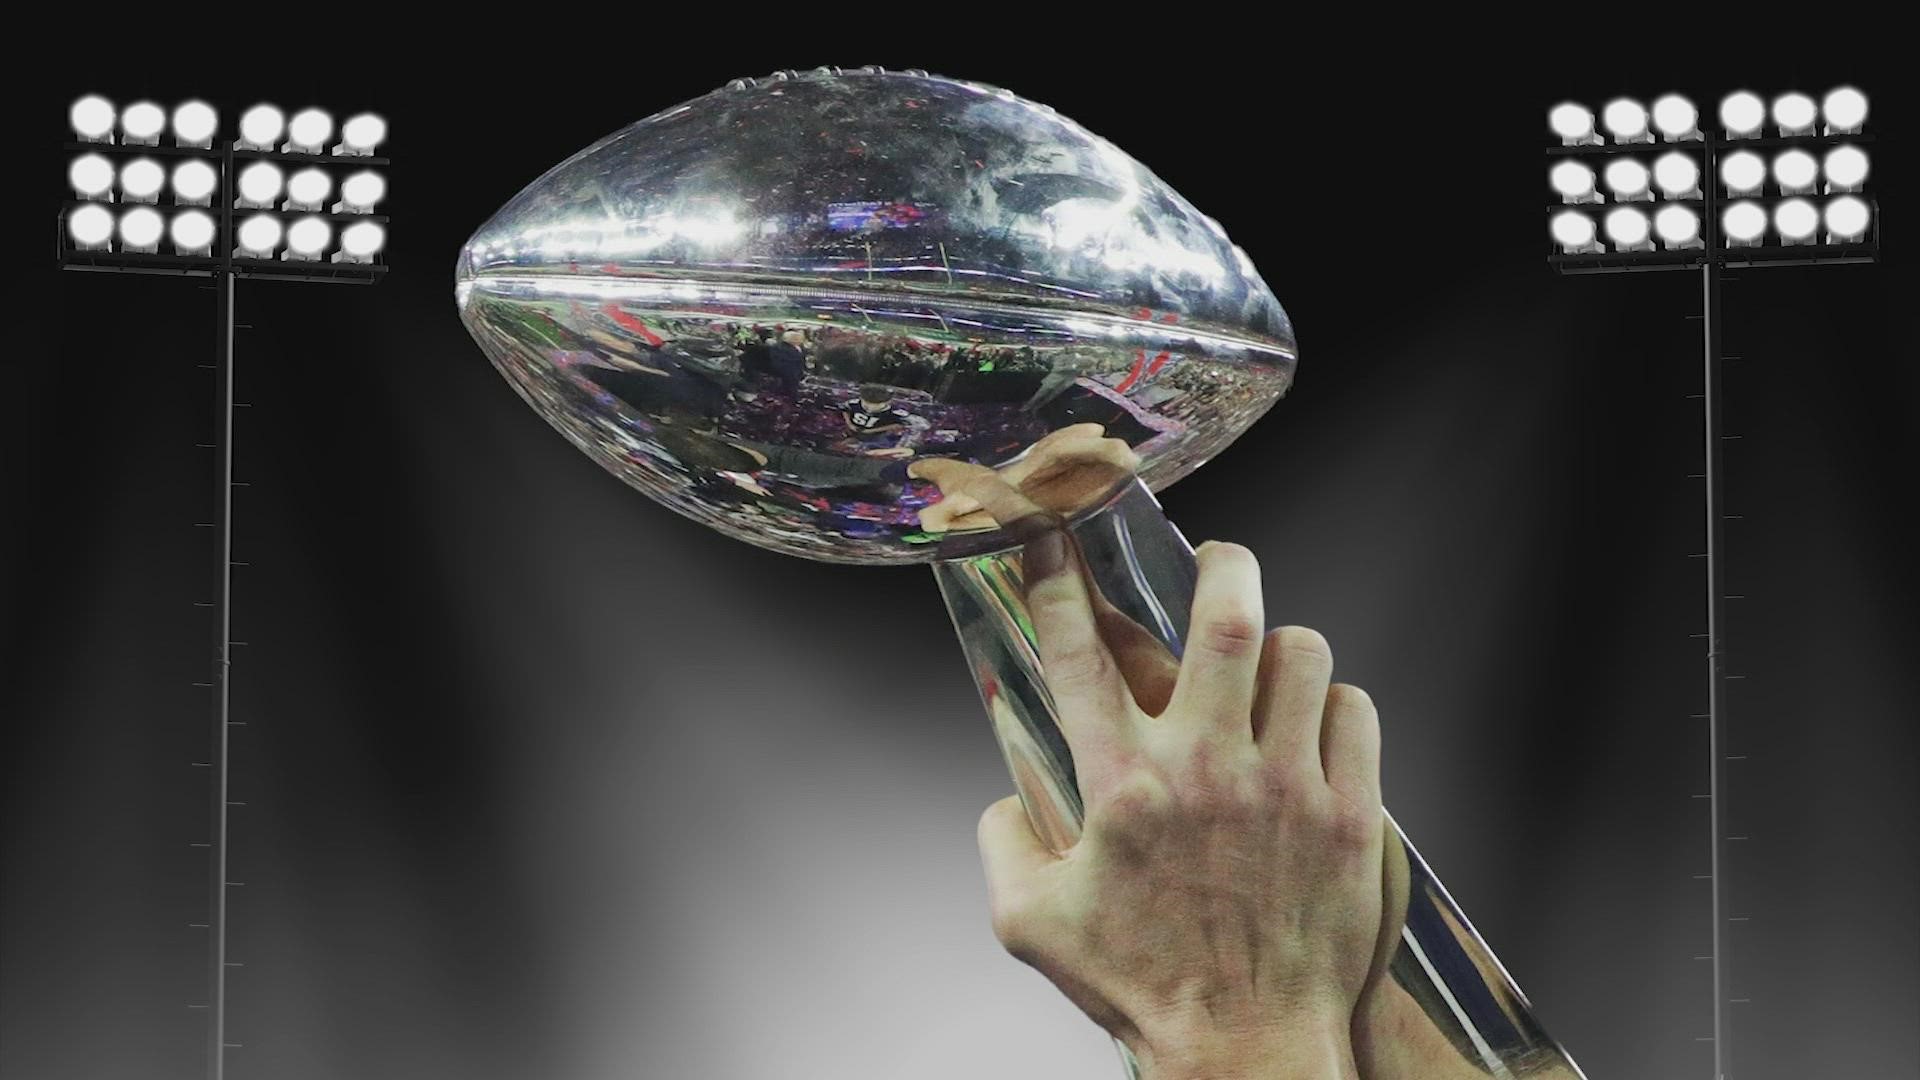 According to a WalletHub study, fans would put a lot more money on the line to watch their team FINALLY win their Super Bowl trophy. What would you risk for the win?